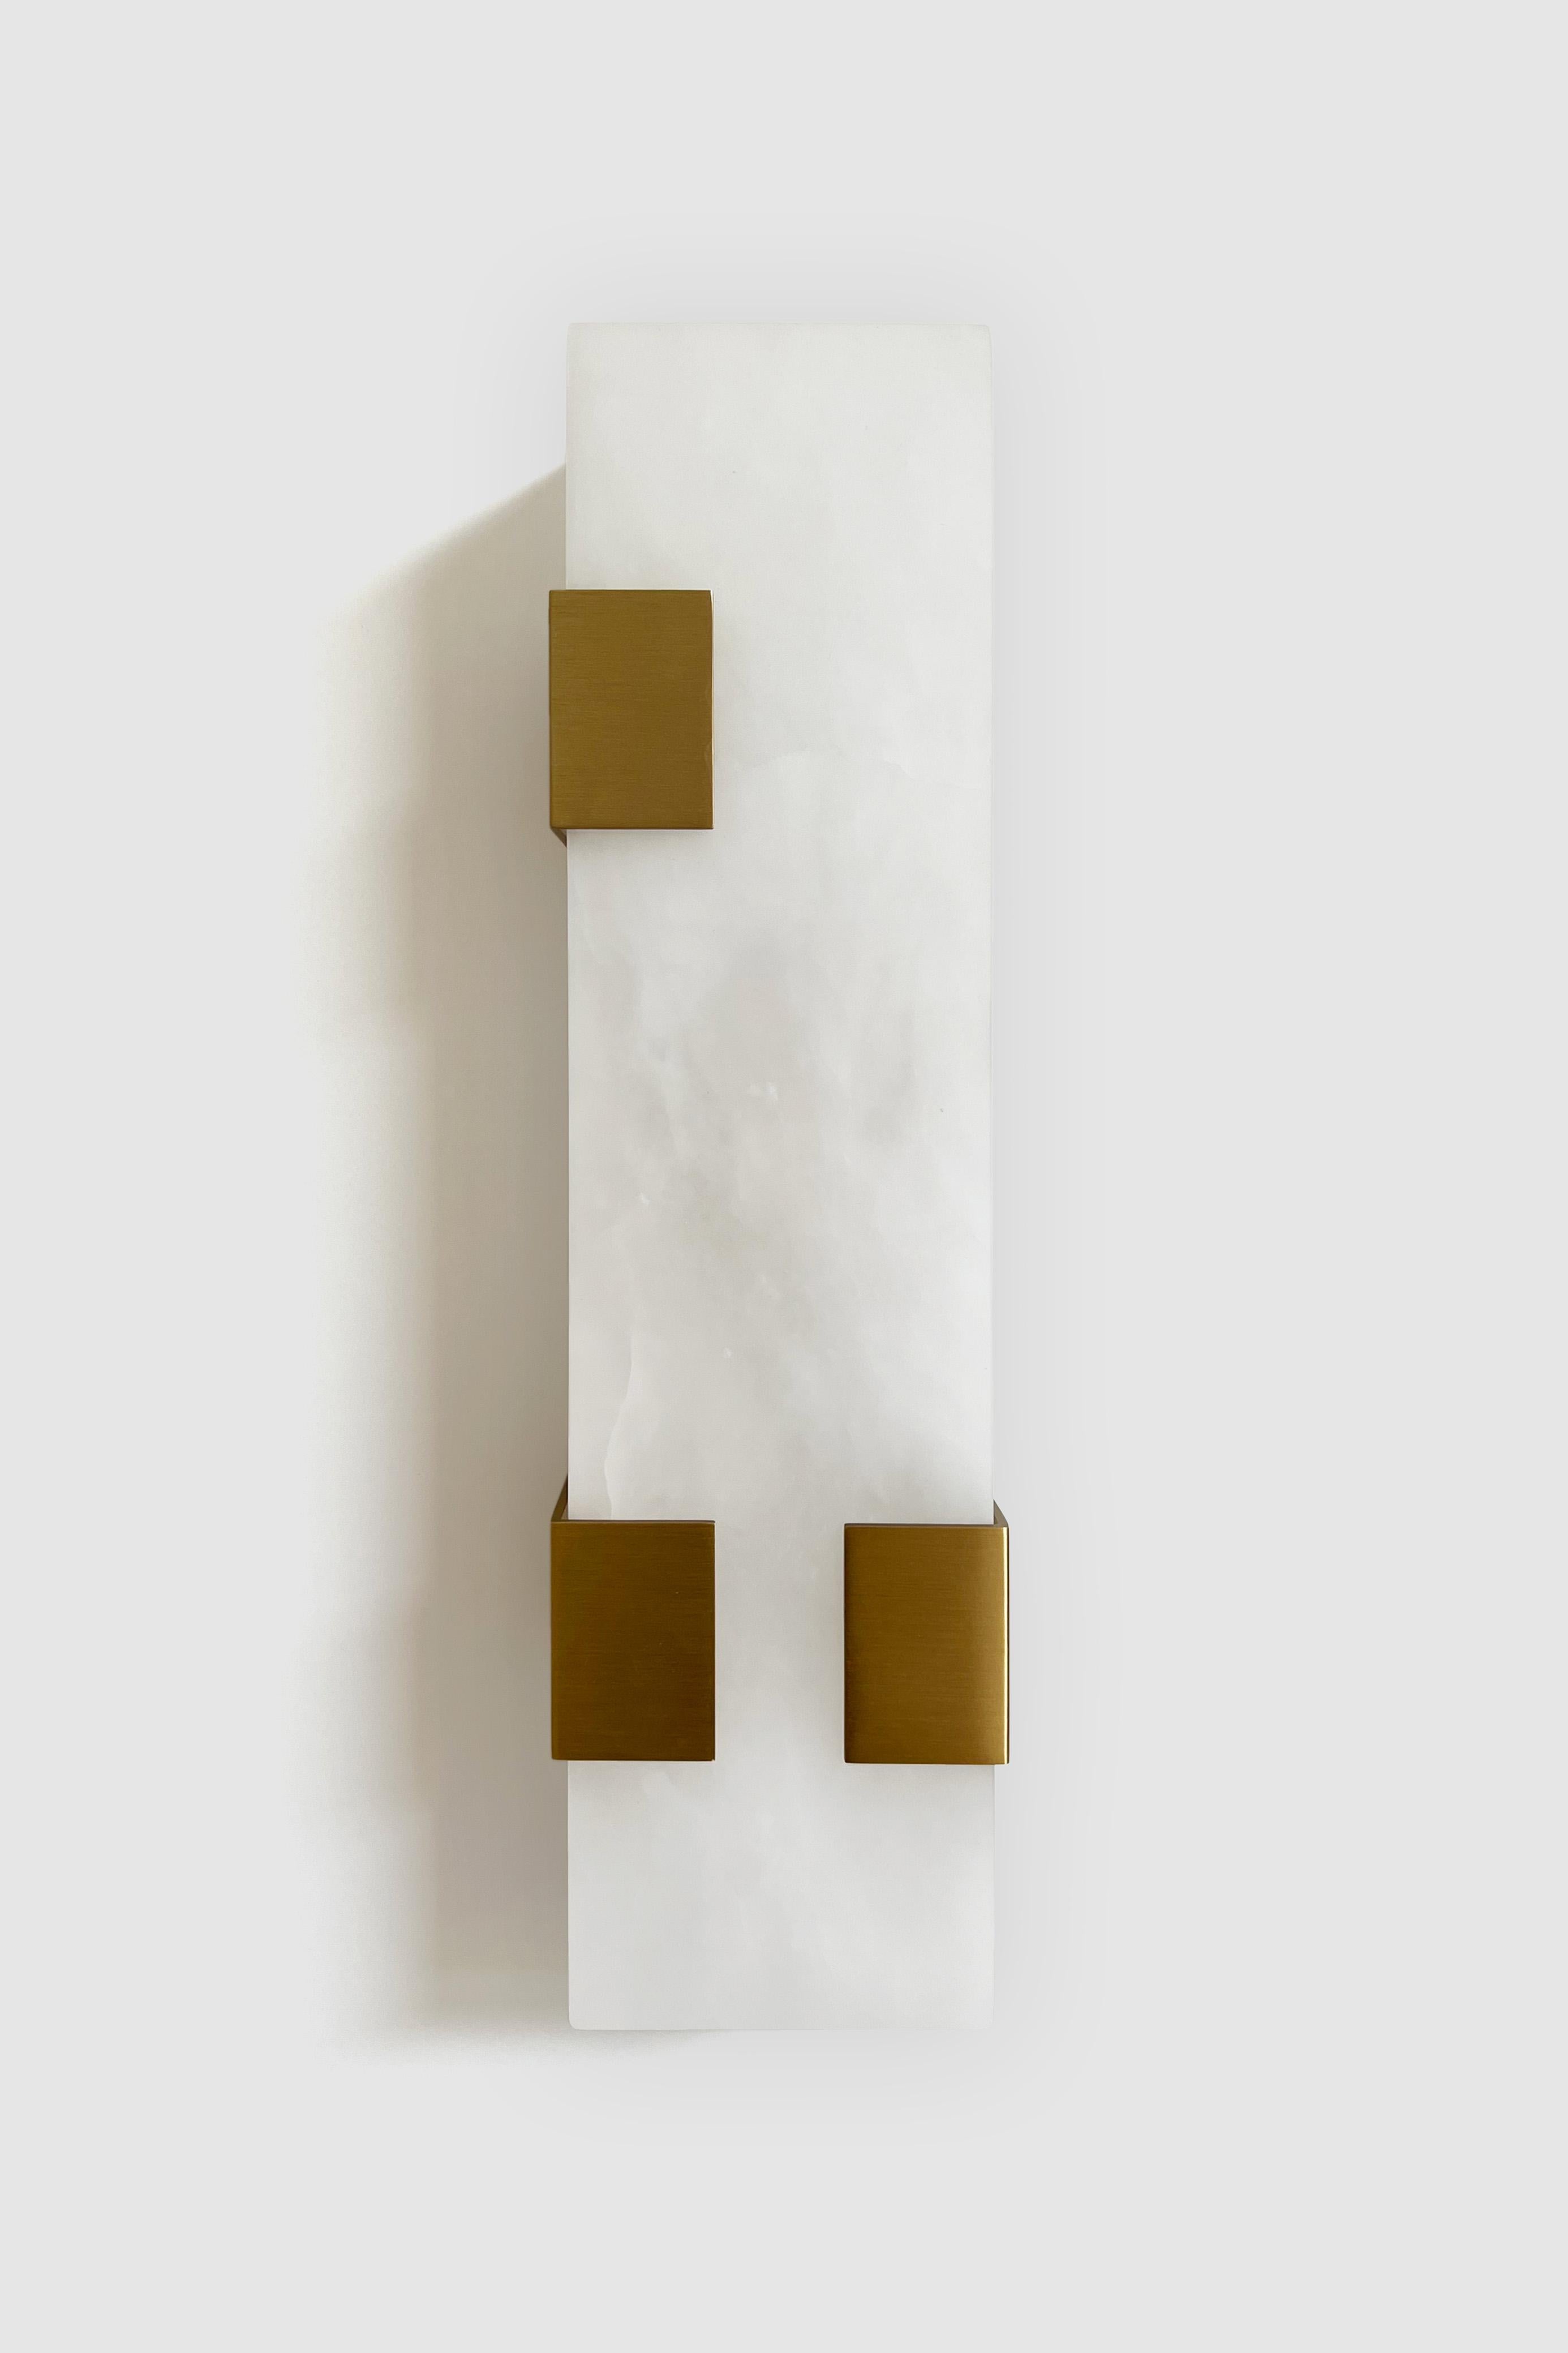 Orphan work 003-3C Sconce
Shown in brushed brass and alabaster
Available in brushed brass, brushed nickel and blackened brass
Measures: 19”H x 5 1/4”W x 3 7/8”D
Wall or ceiling mount
Vertical or horizontal
Plug-in by request
1-4 adjustable clips
UL